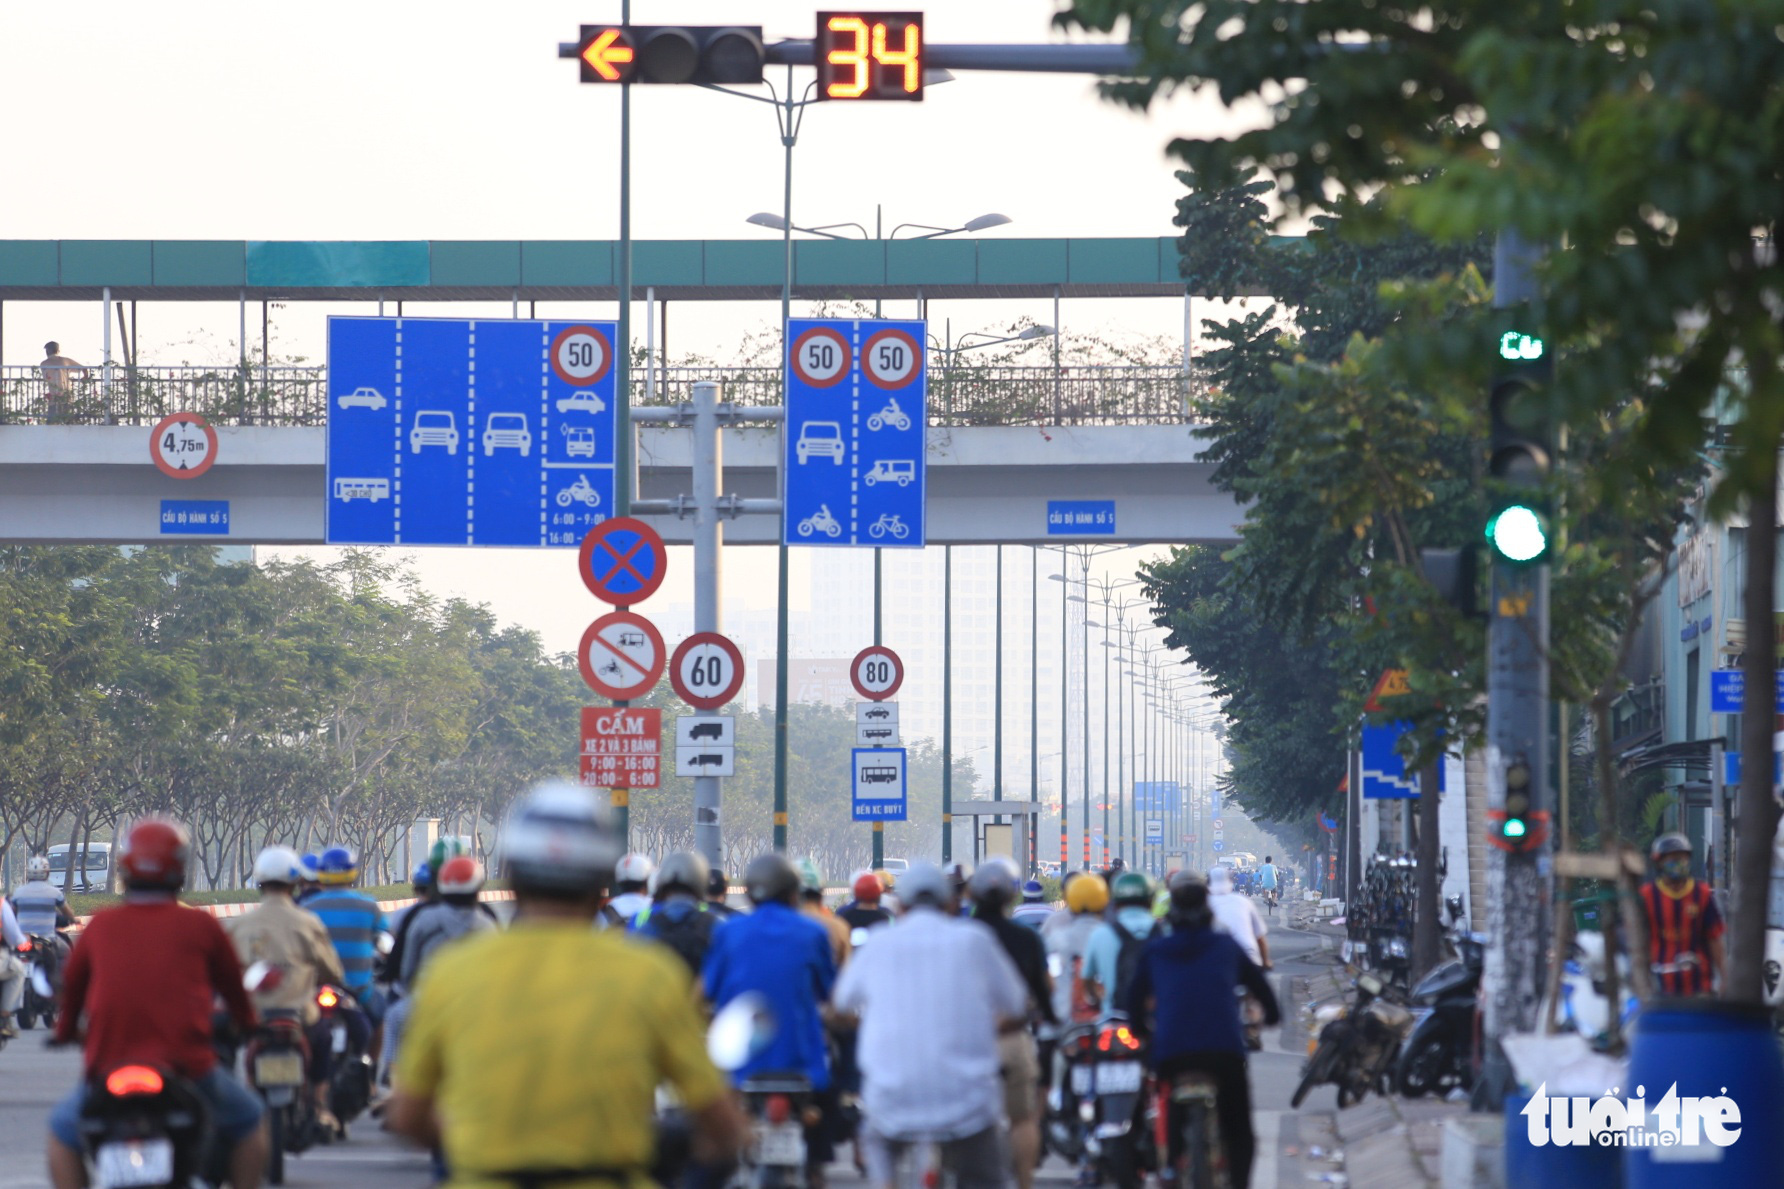 Commuters travel on a street in Ho Chi Minh City, November 2, 2021. Photo: Nhat Thinh / Tuoi Tre